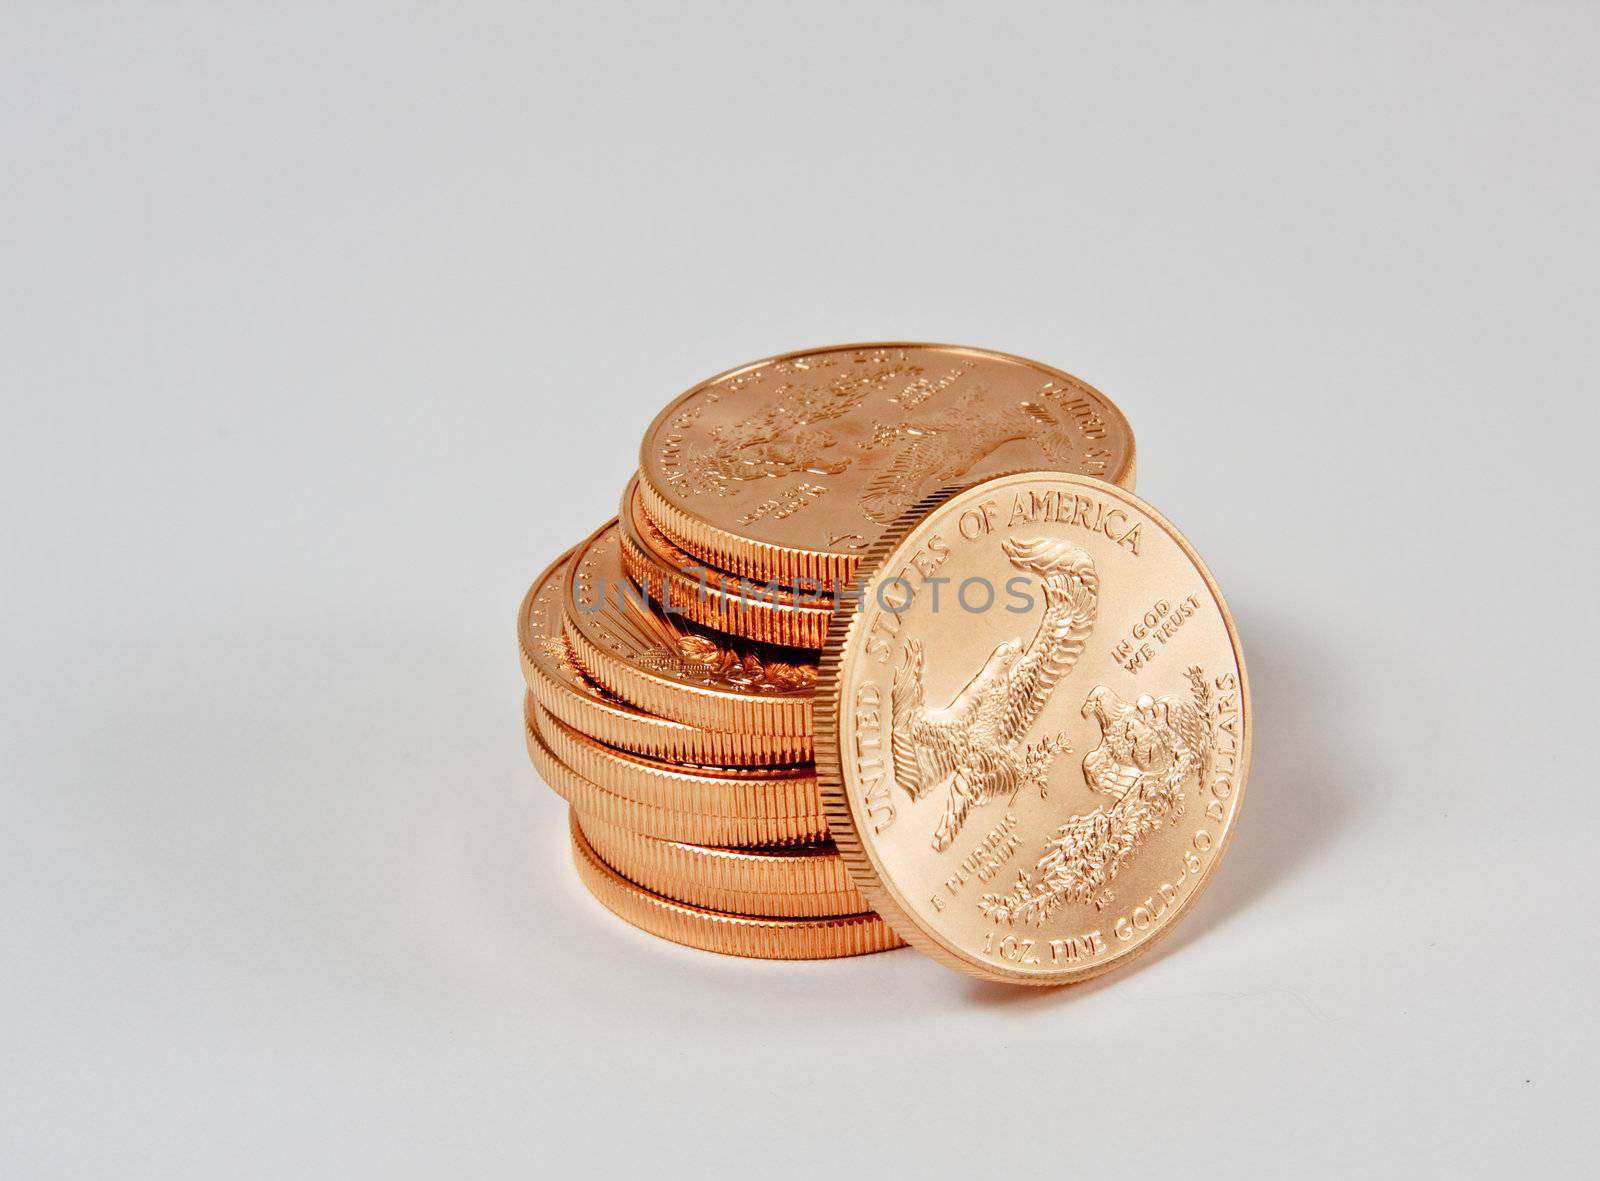 Stack of 1 ounce gold coins by steheap